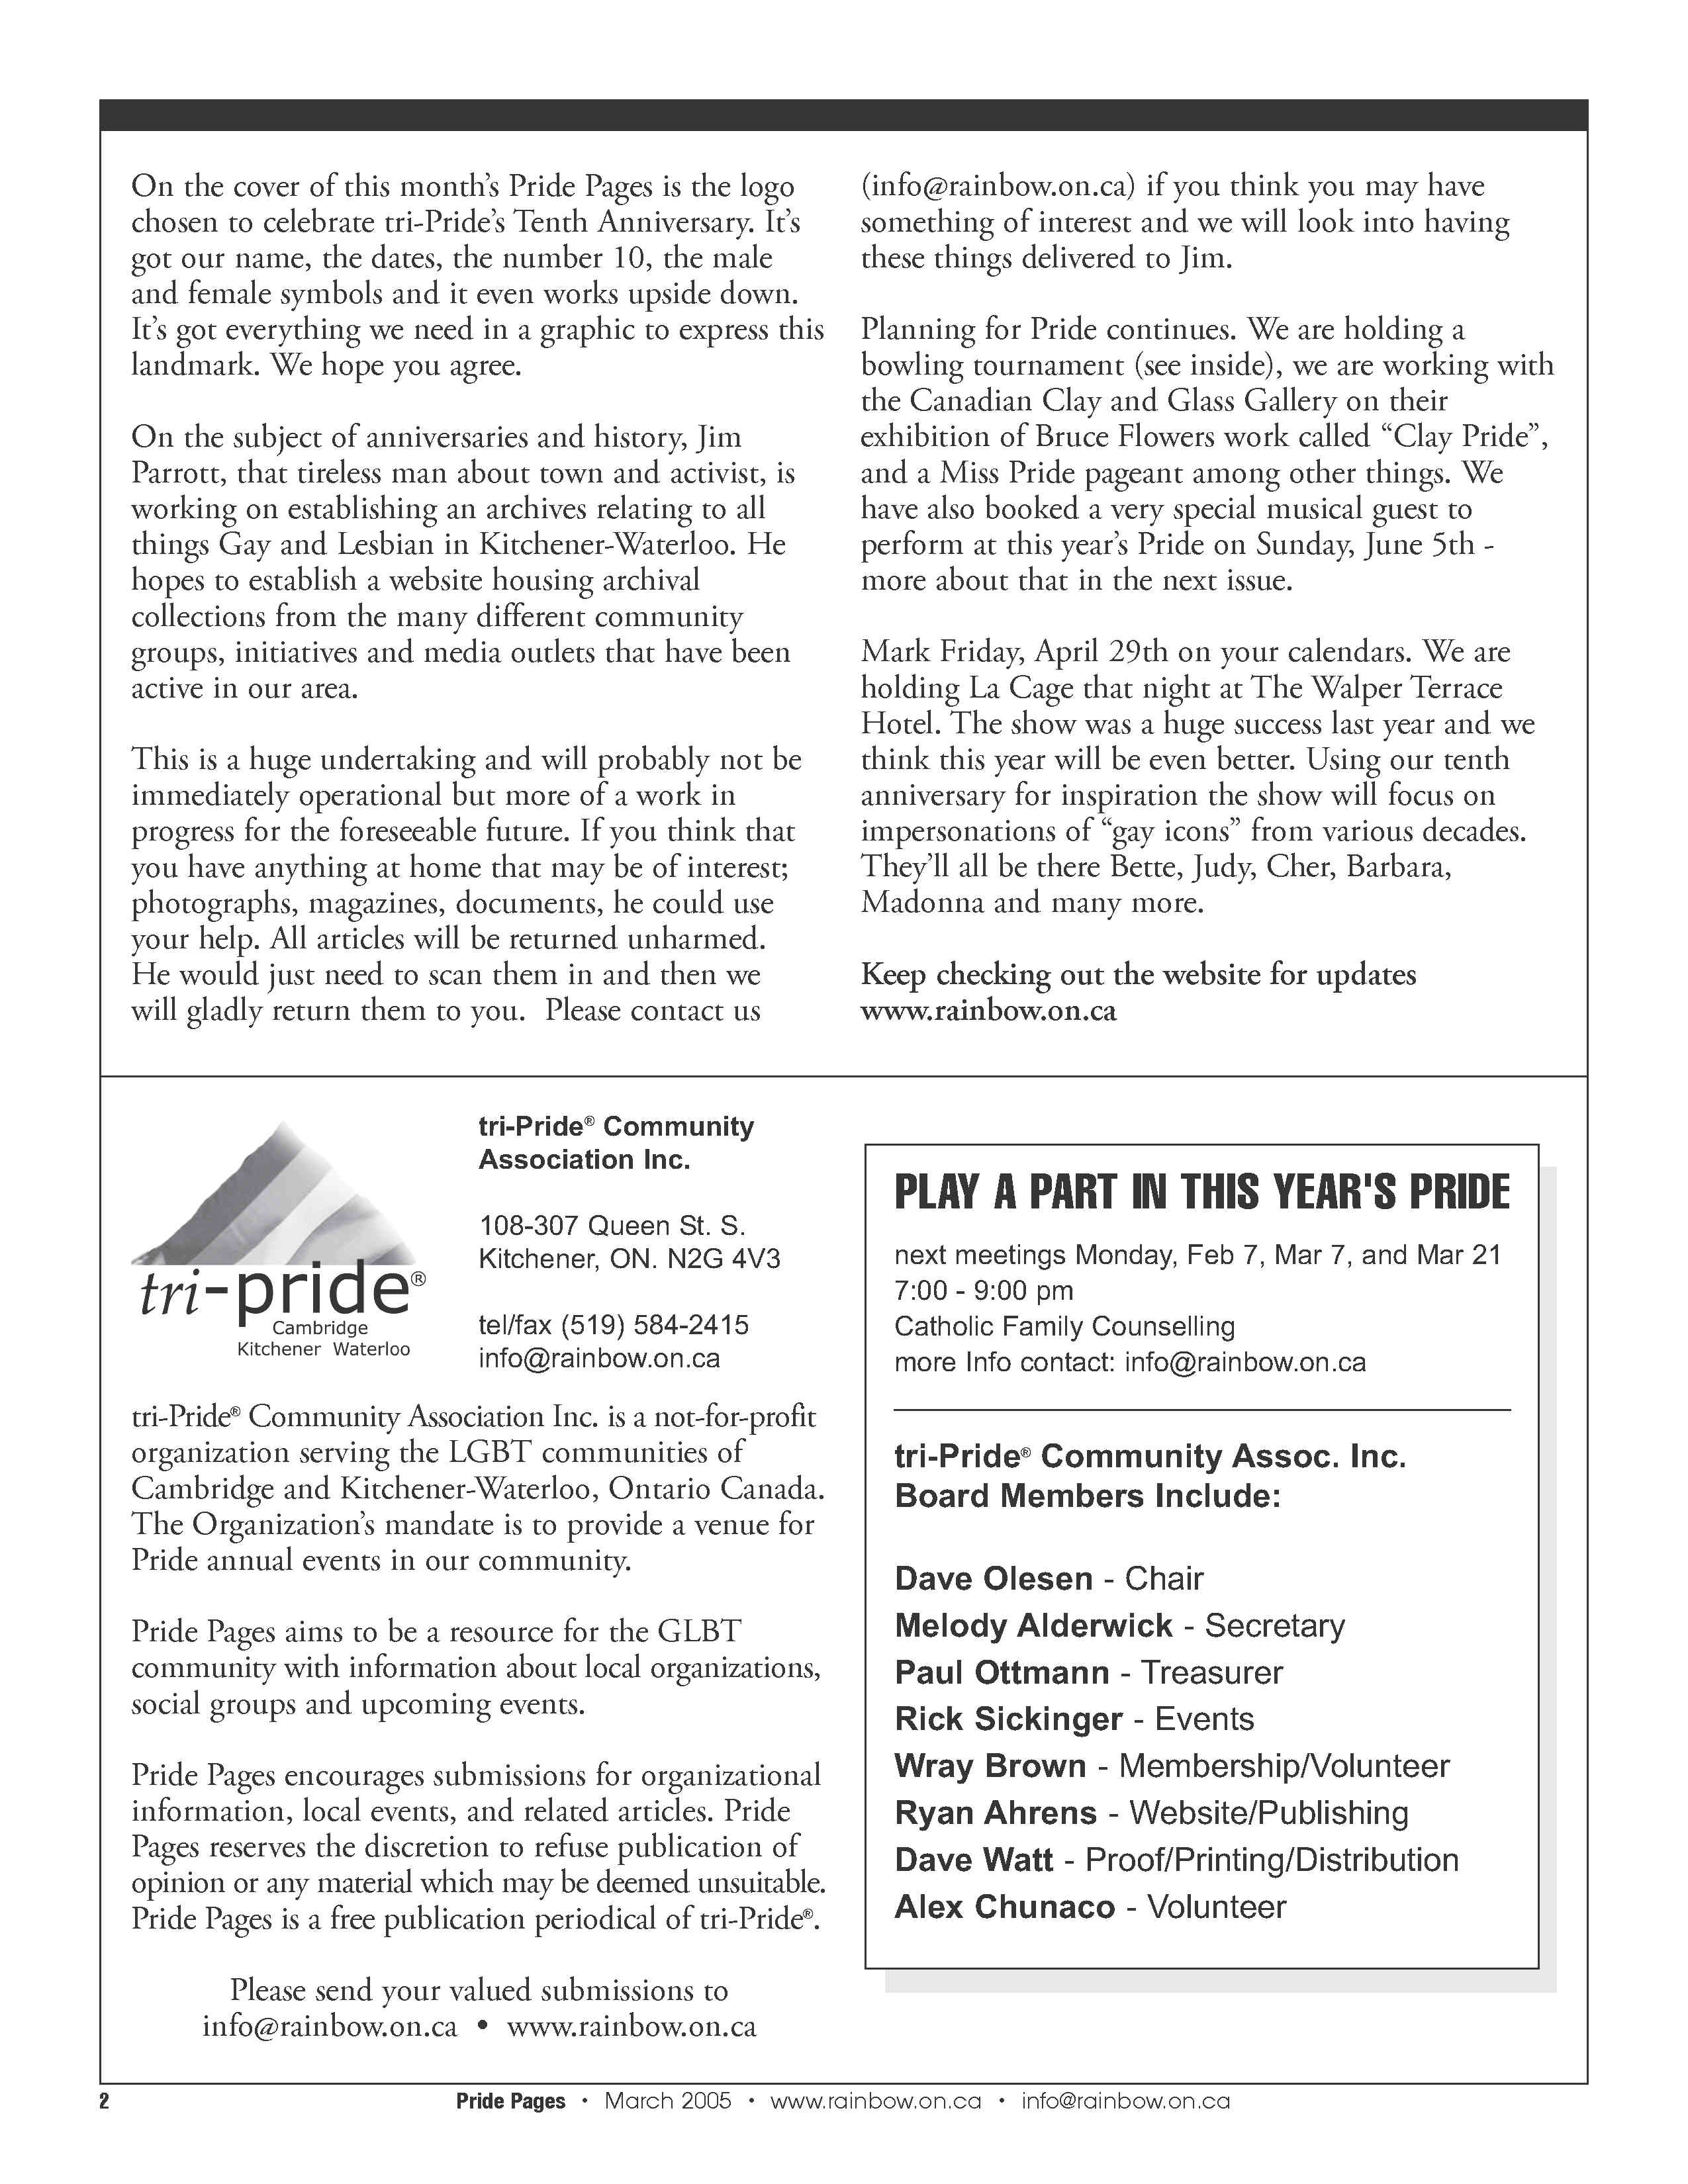 Pride Pages 2005-03 p2